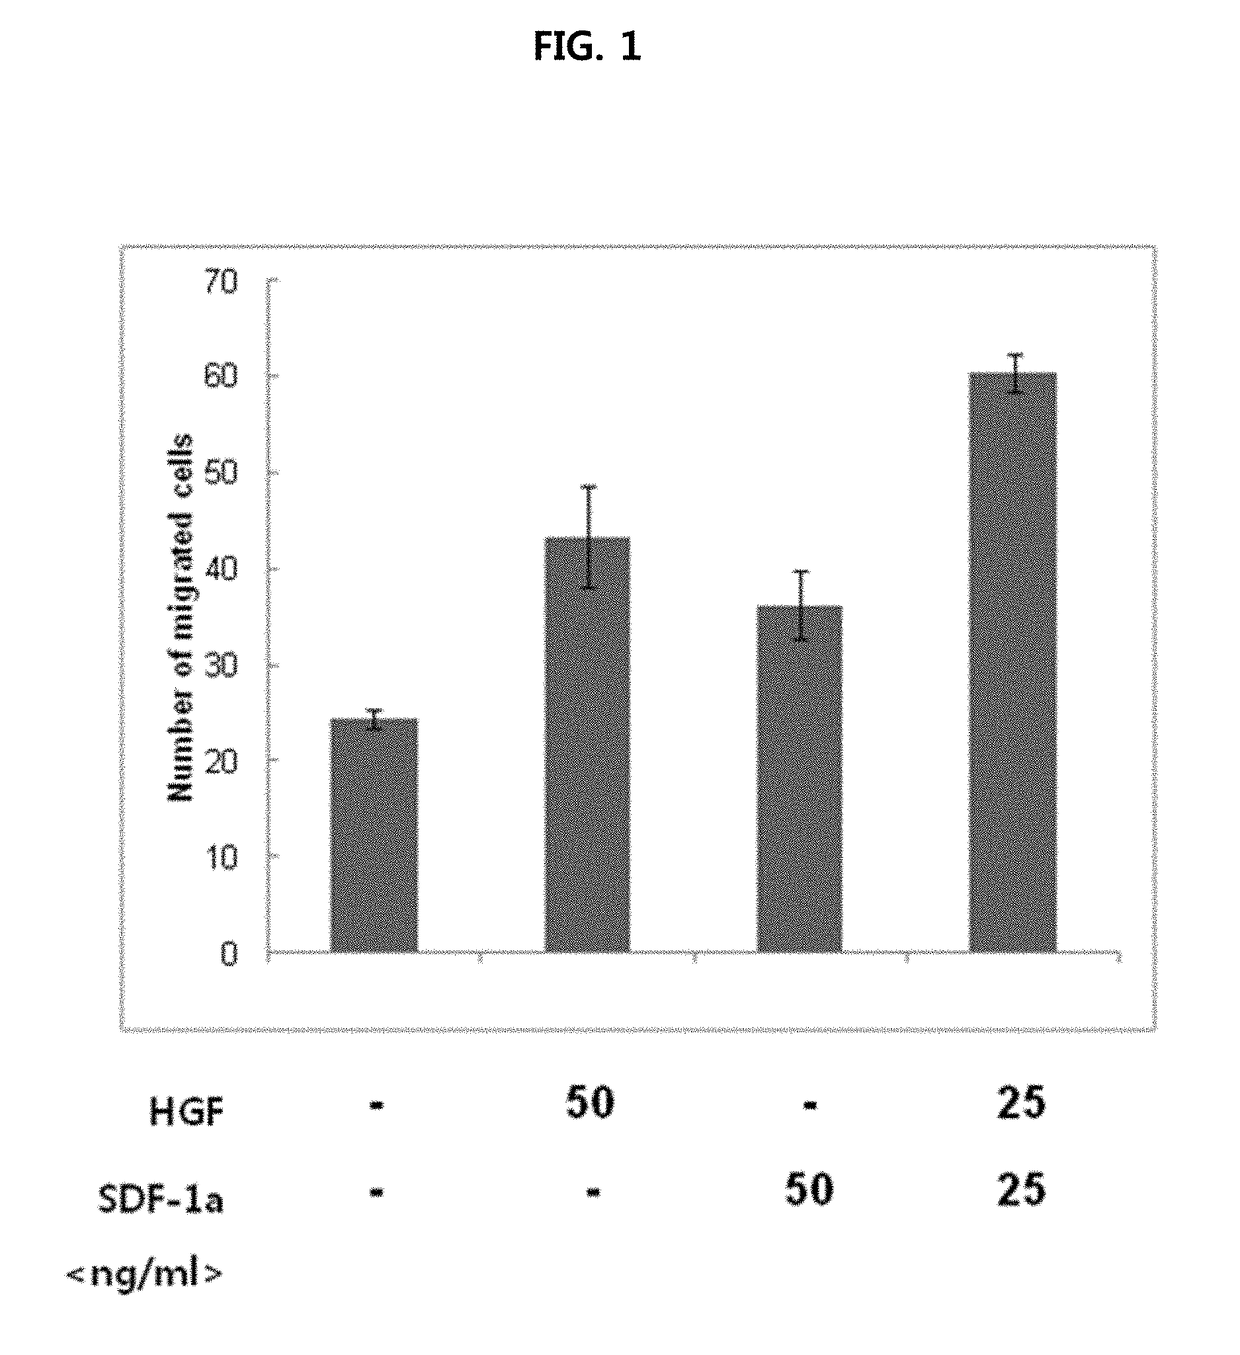 Composition for preventing or treating peripheral vascular disease using hepatocyte growth factor and stromal cell derived factor 1a